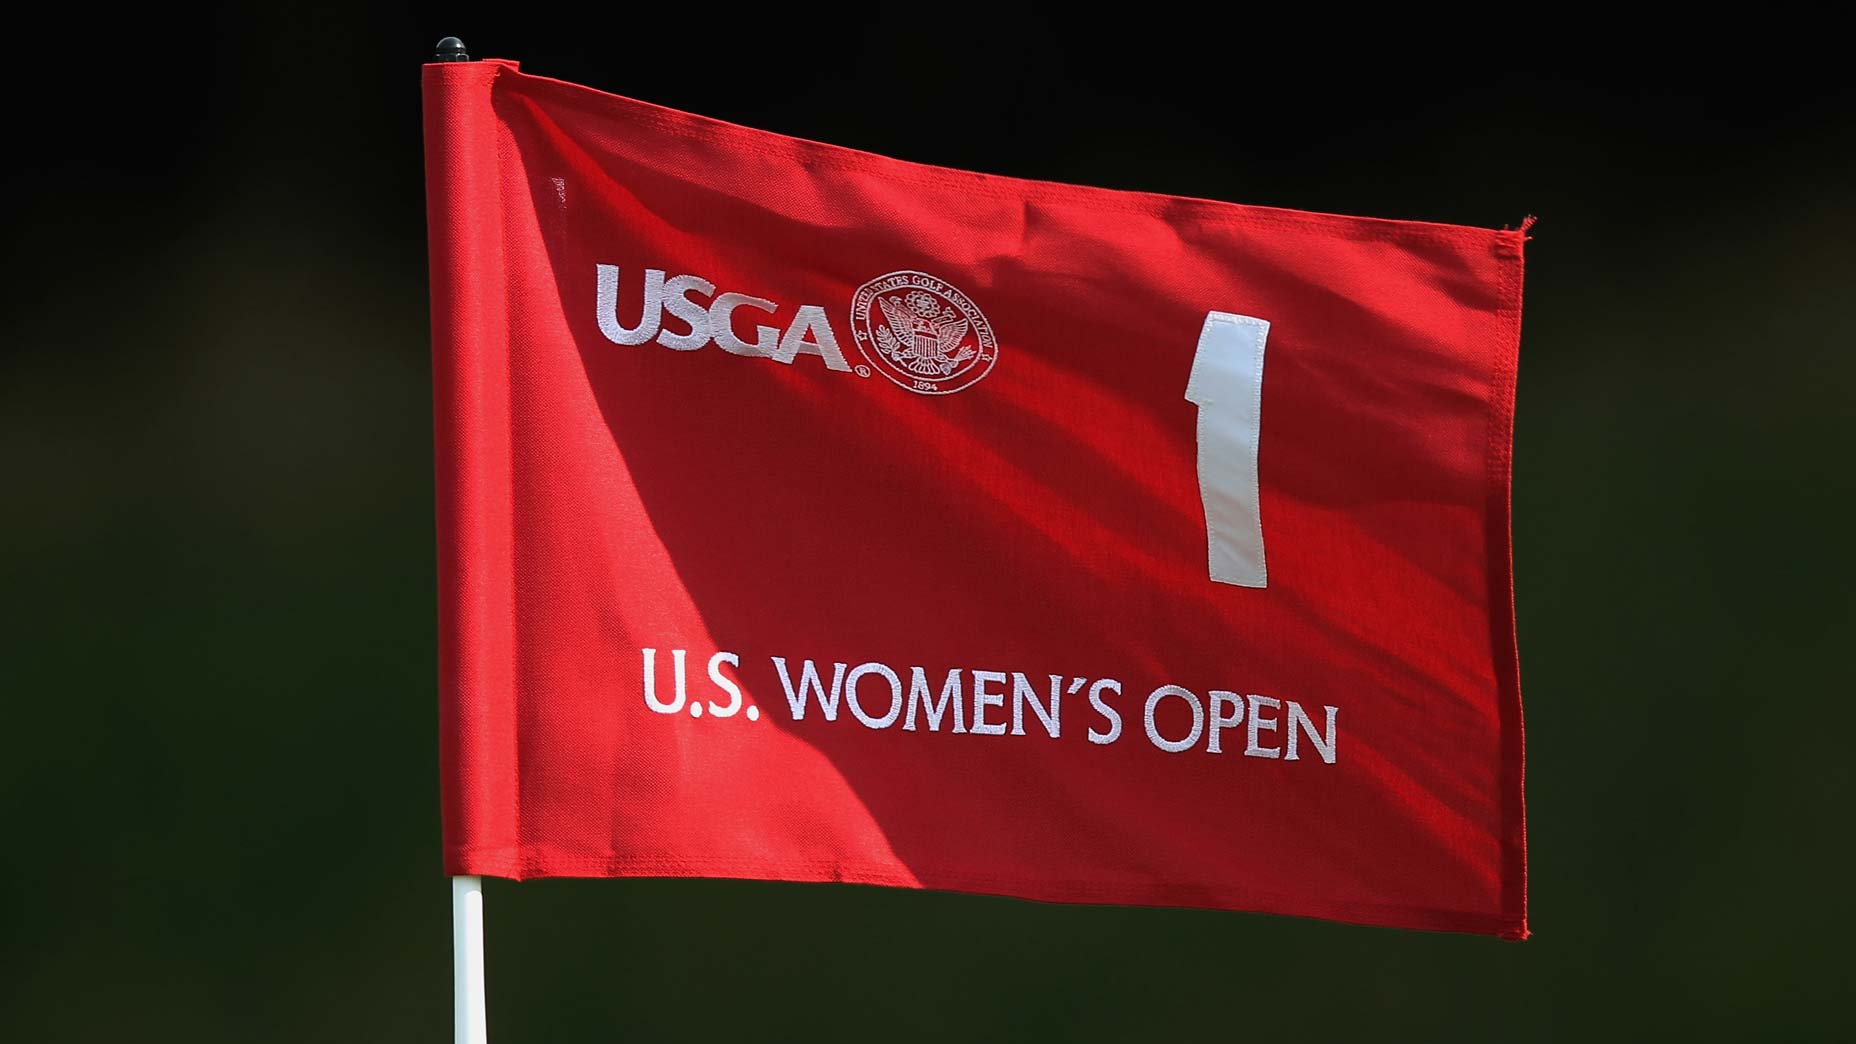 A red U.S. Women's Open flagstick pictured at previous event